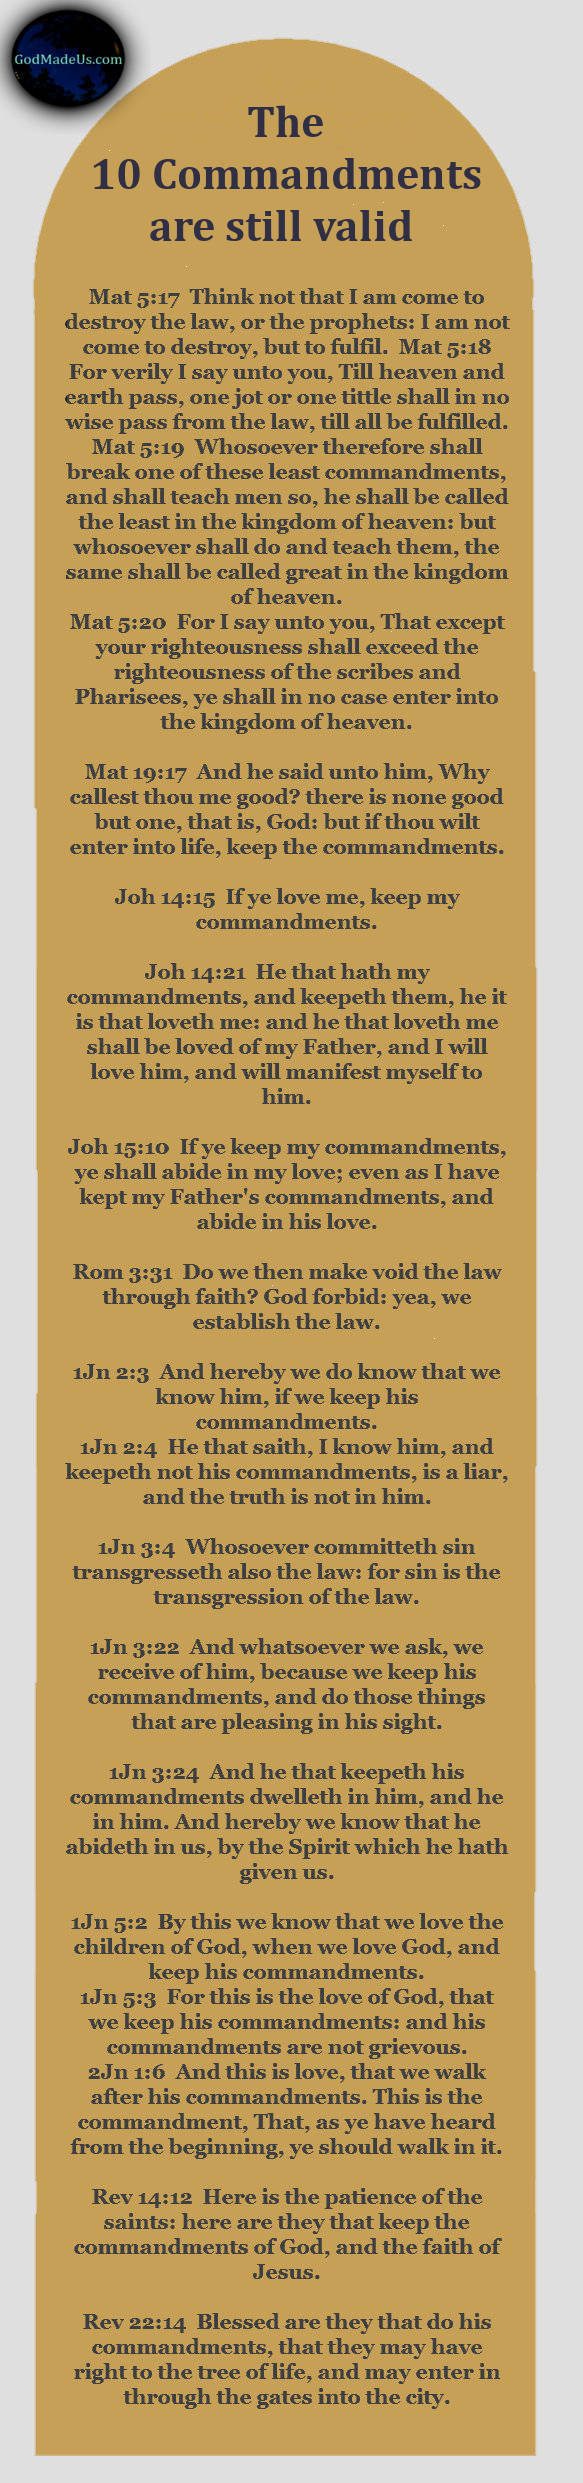 Image showing the verses which tell us the 10 commandments are still valid.